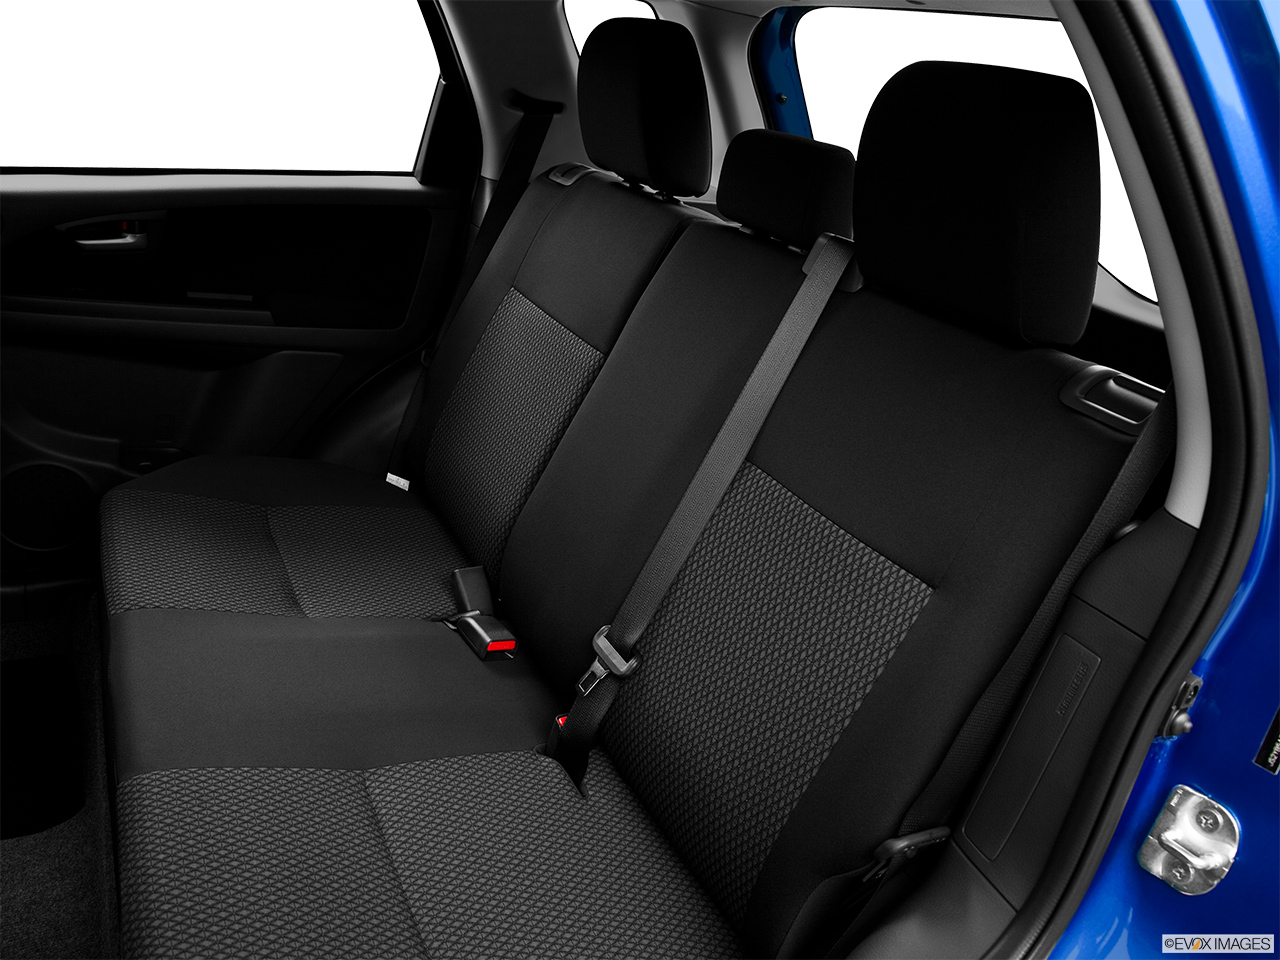 2013 Suzuki SX4 AWD Crossover Premium AT AWD Rear seats from Drivers Side. 